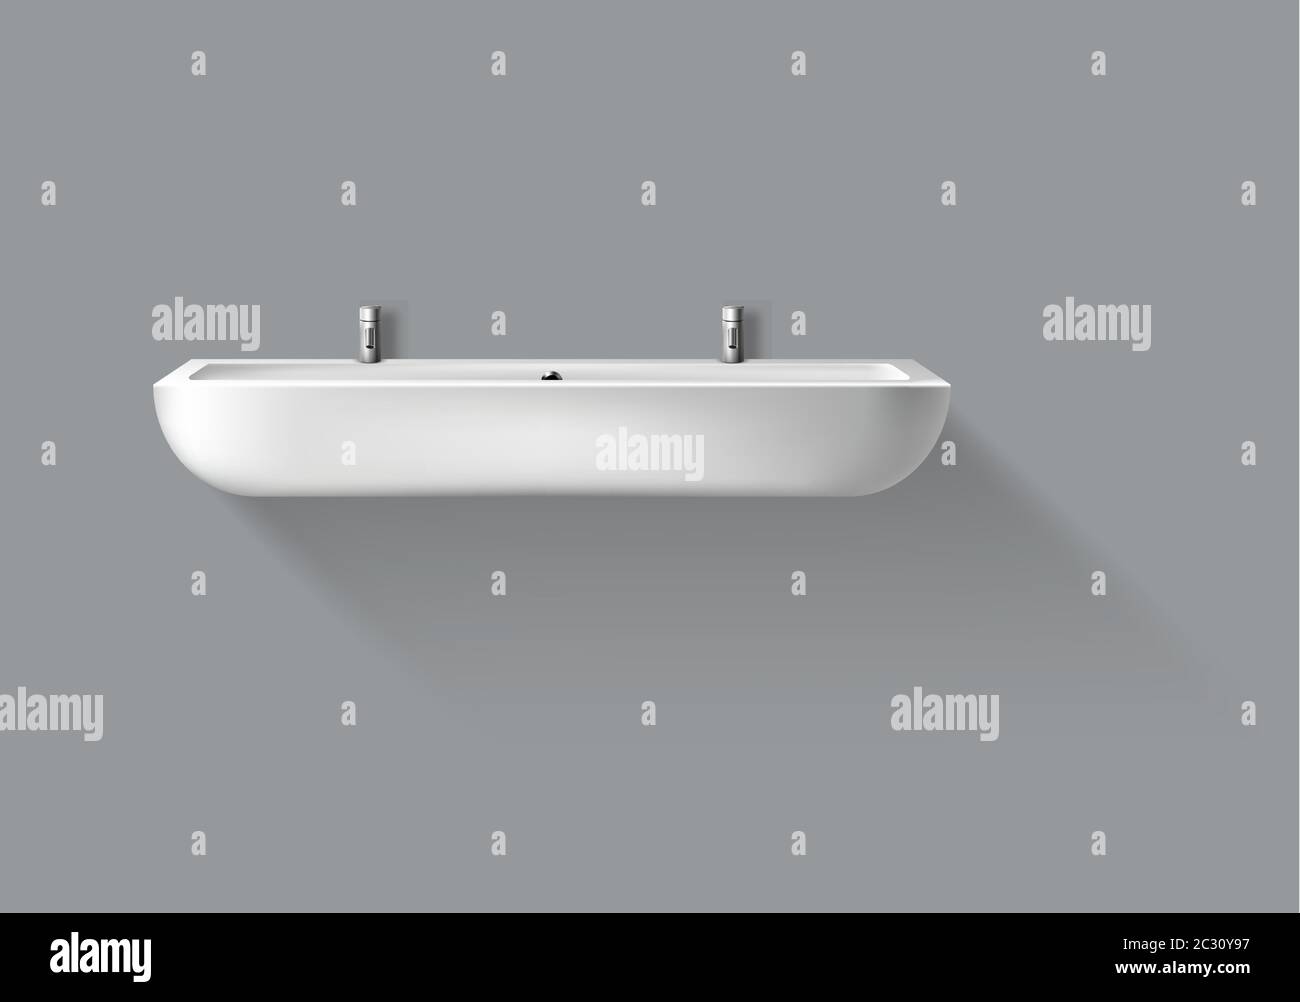 Long washbasin with taps for bathroom, public restroom, modern WC. Vector realistic white ceramic sink with faucet hangs on wall in washroom isolated Stock Vector